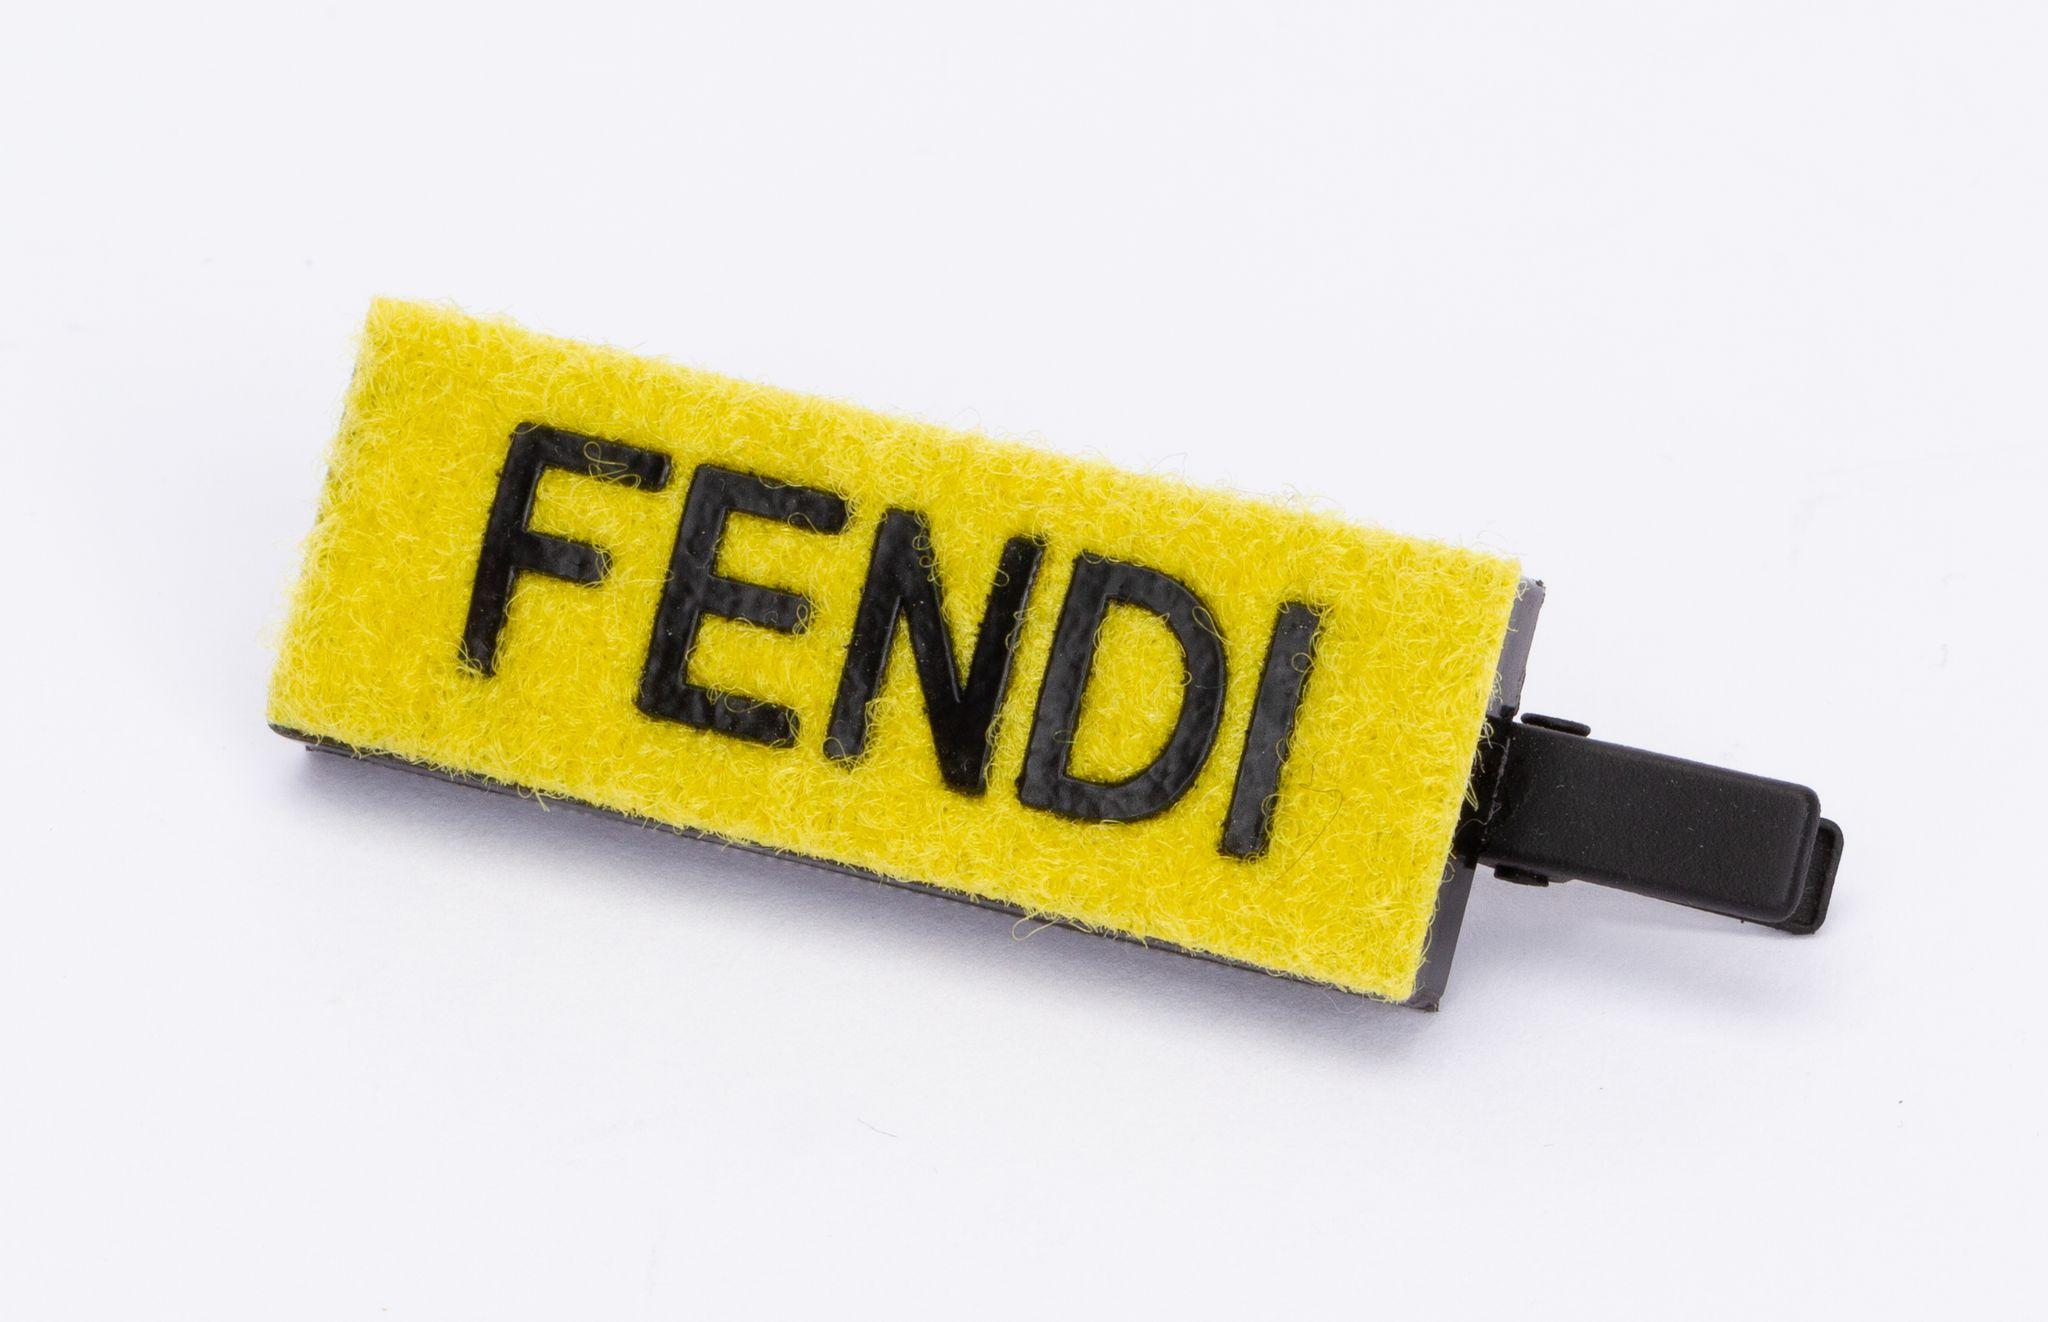 Fendi hairclip in yellow and black. It's rectangular and on the yellow fleece is Fendi written. The piece is new and includes the original box.